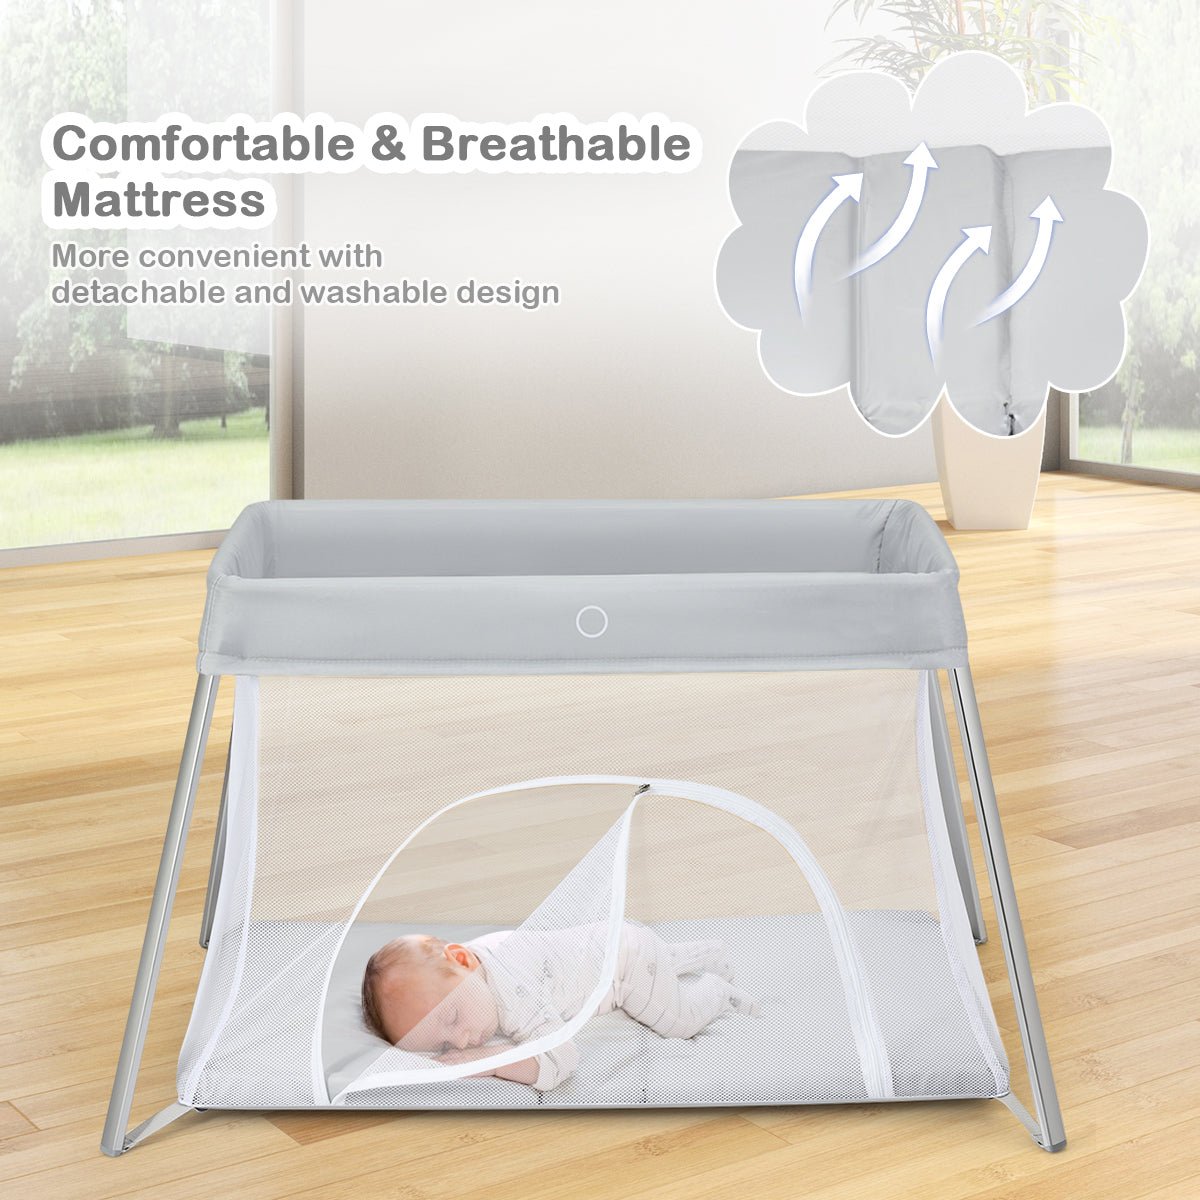 All-in-One Baby Crib: Fold, Pack, & Go